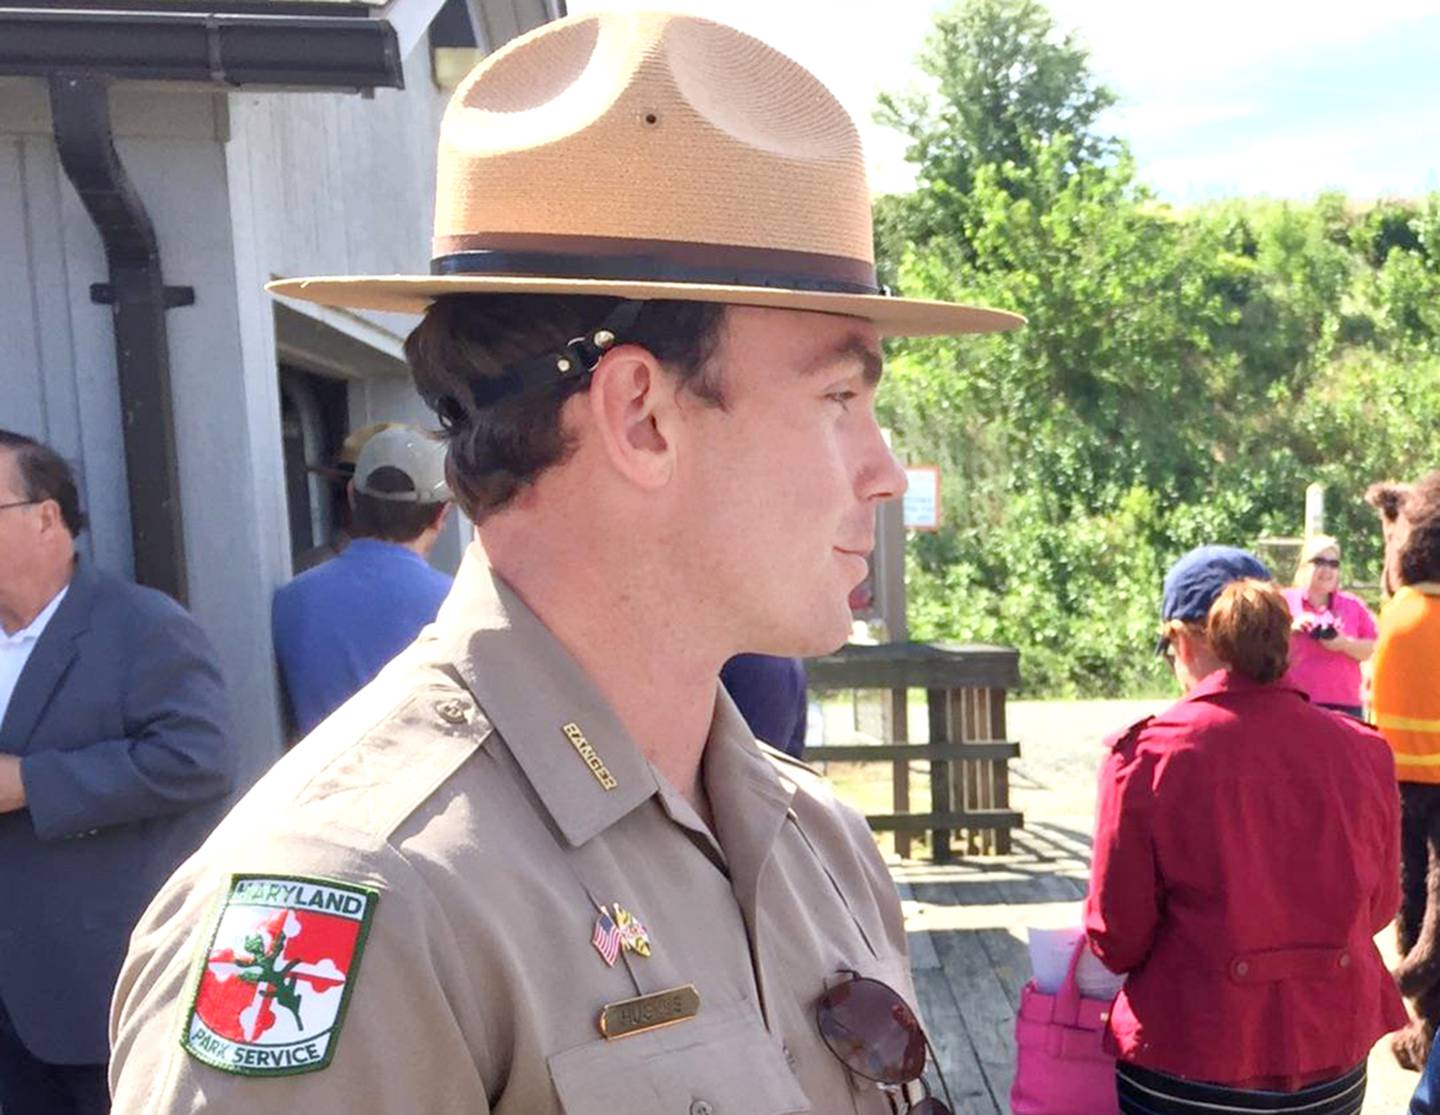 Dean Hughes, shown at a 2016 event, began working in the park system in 2009 and became assistant park manager at Gunpowder Falls State Park in 2015. He recently left the agency amid an internal review. (Department of Natural Resources)